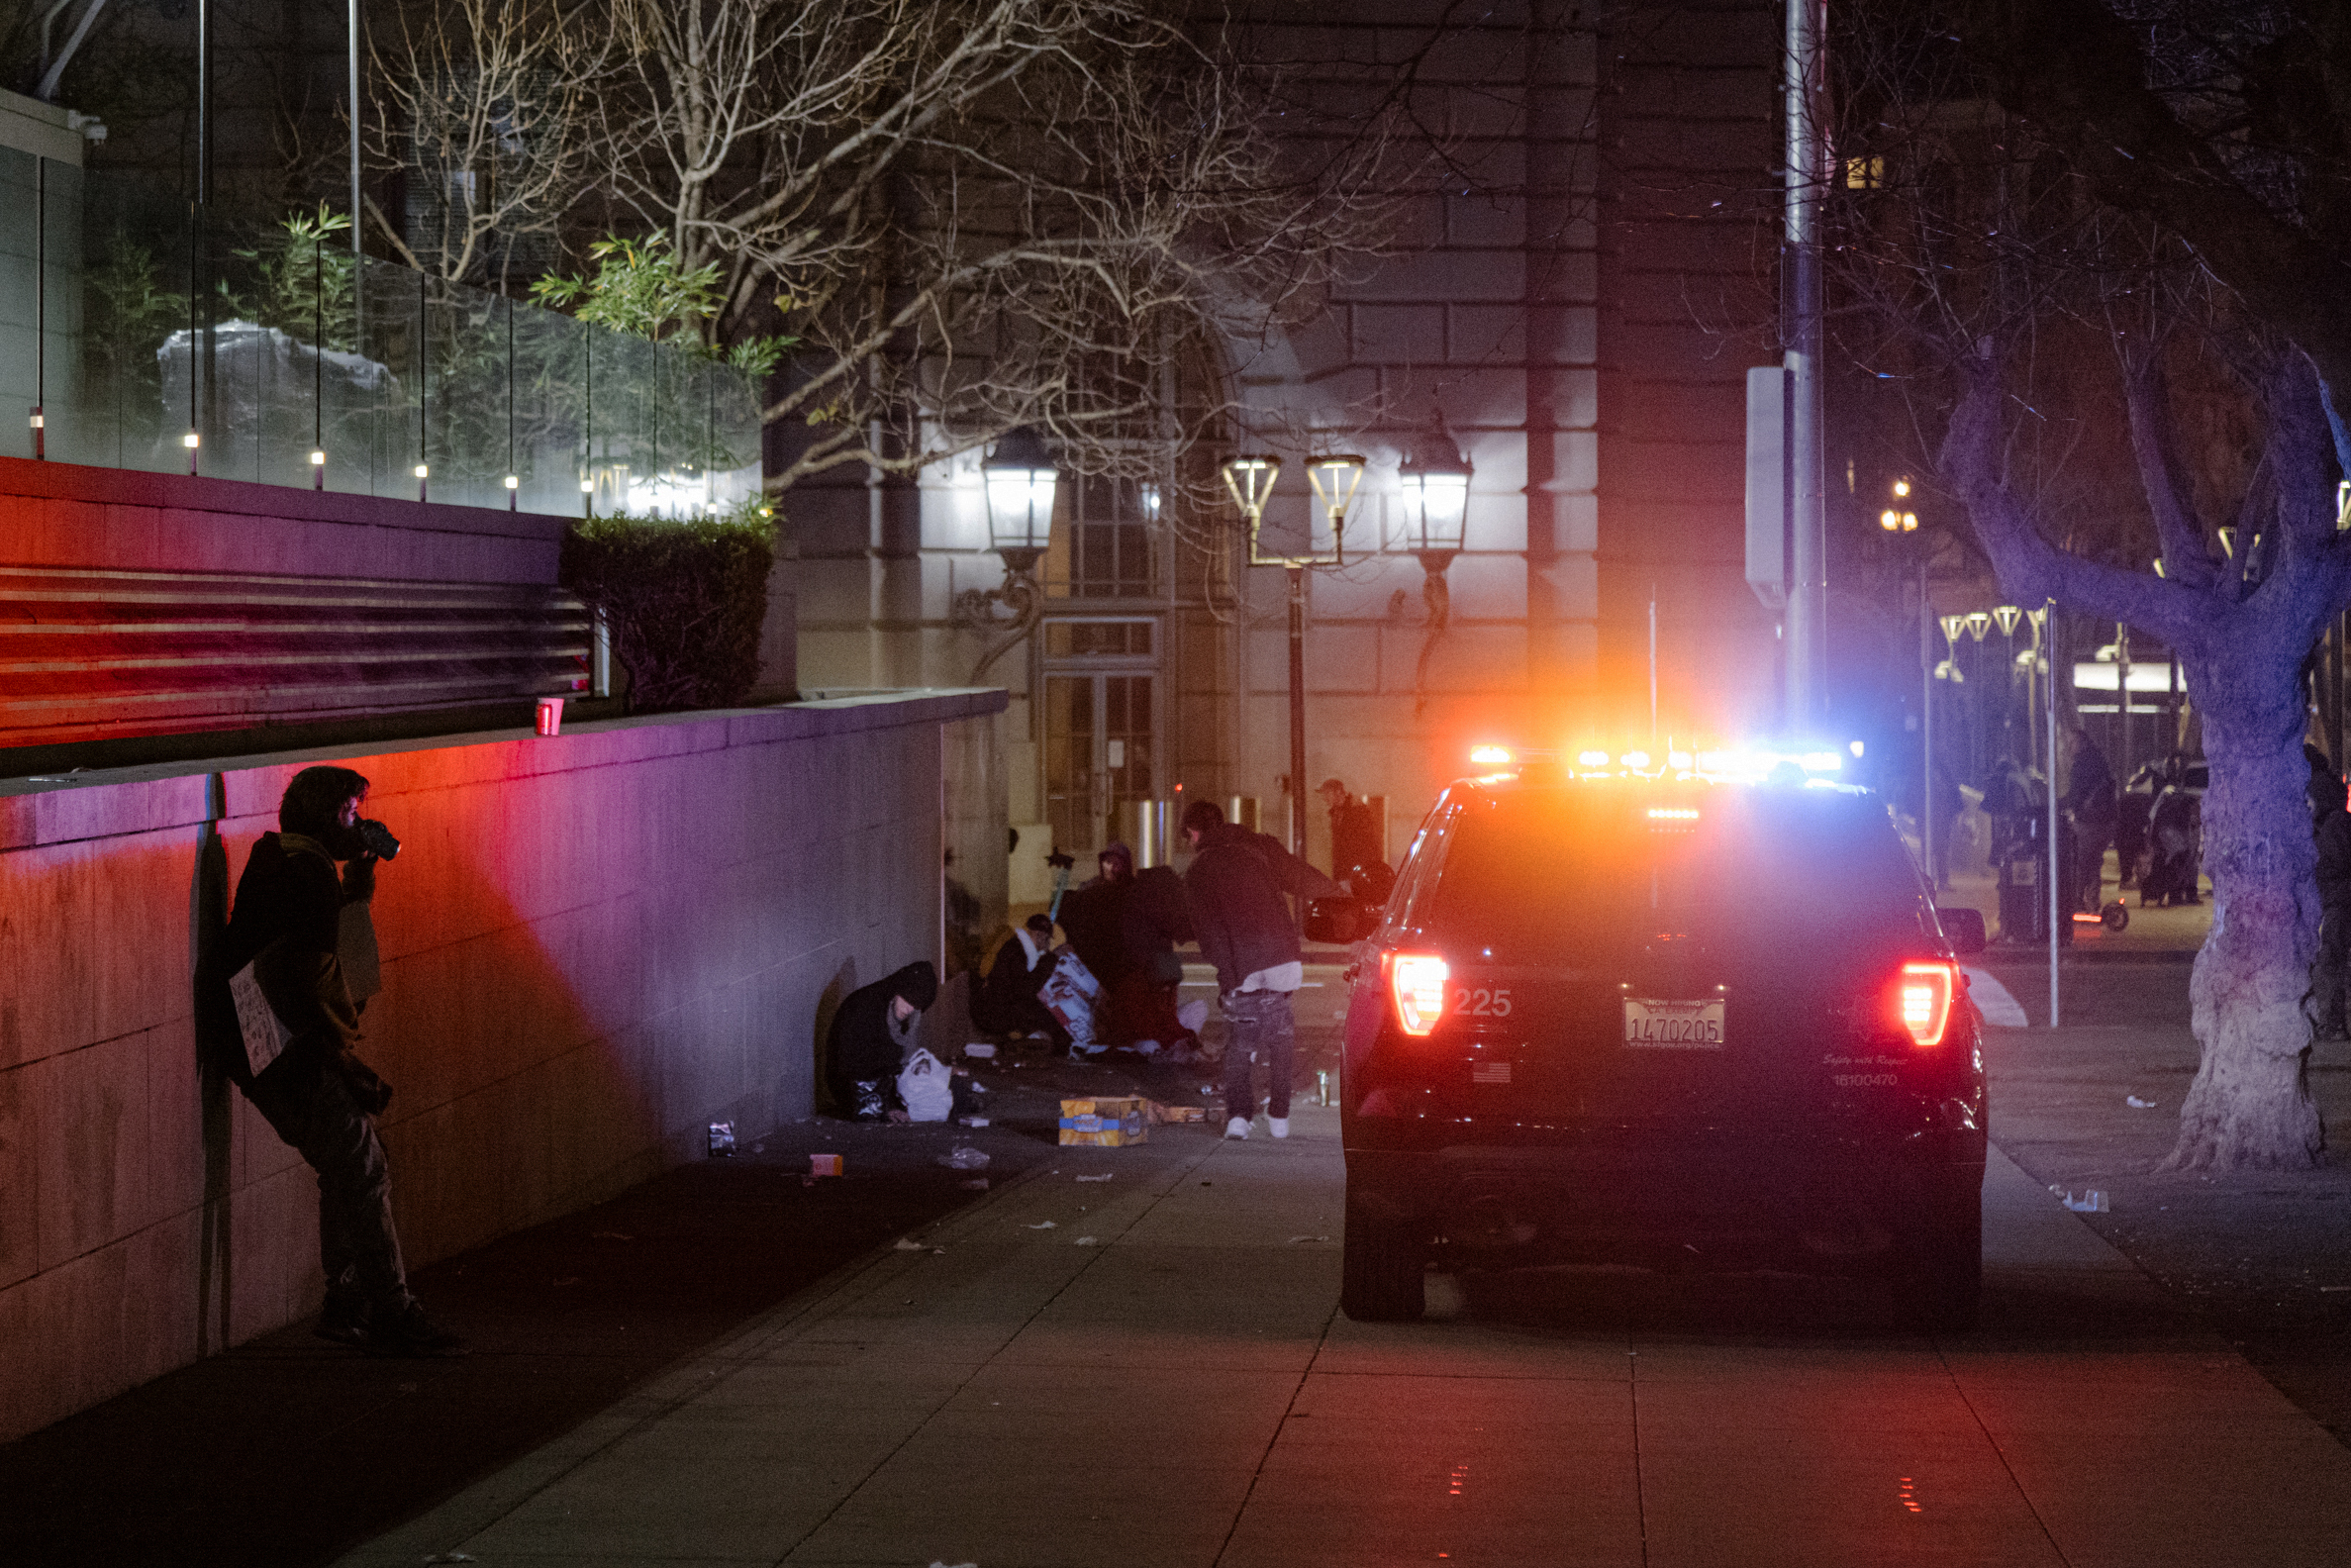 A police car with flashing lights is parked on a dimly lit street beside a building. People are gathered on the sidewalk, and a person is leaning against a wall.